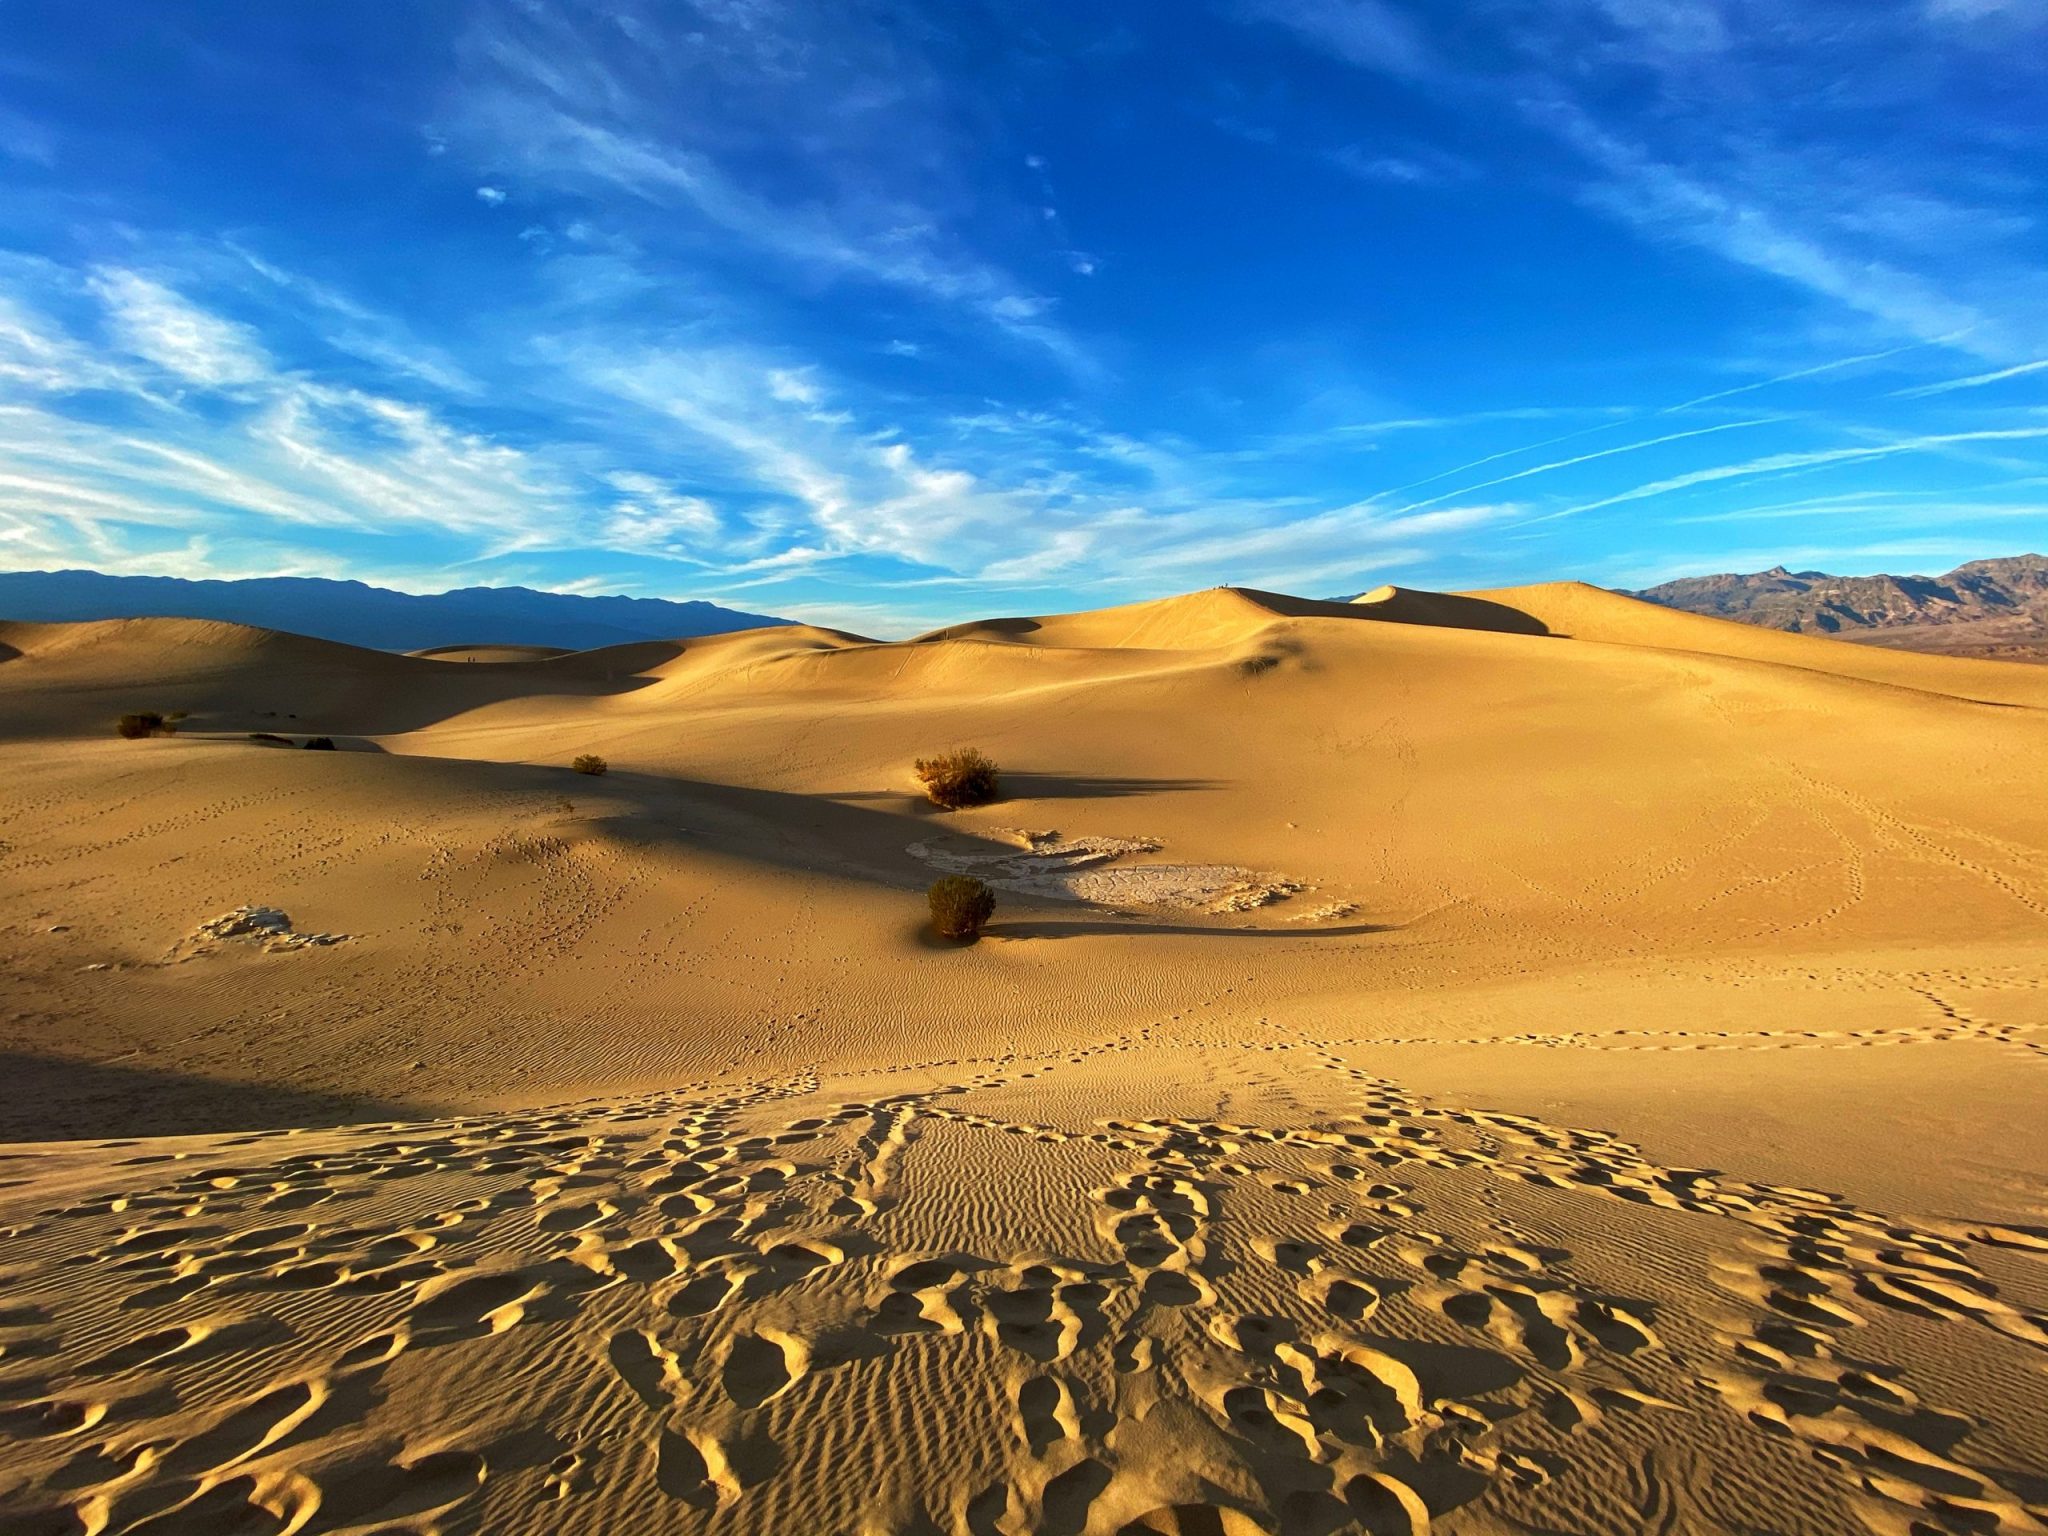 Millions of footprints at the Mesquite Flat Sand Dunes